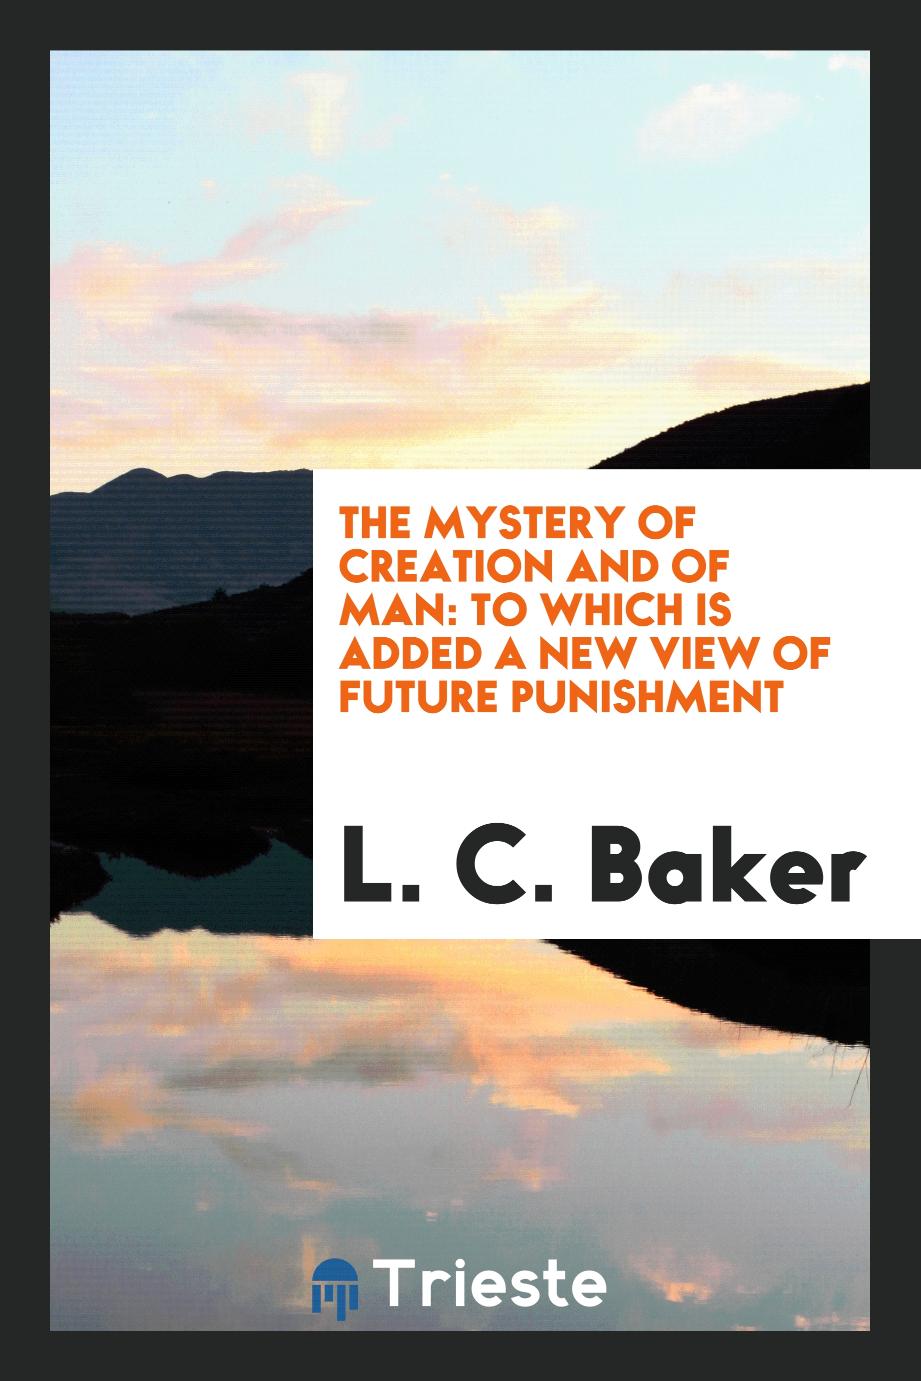 The Mystery of Creation and of Man: To Which is Added a New View of Future Punishment